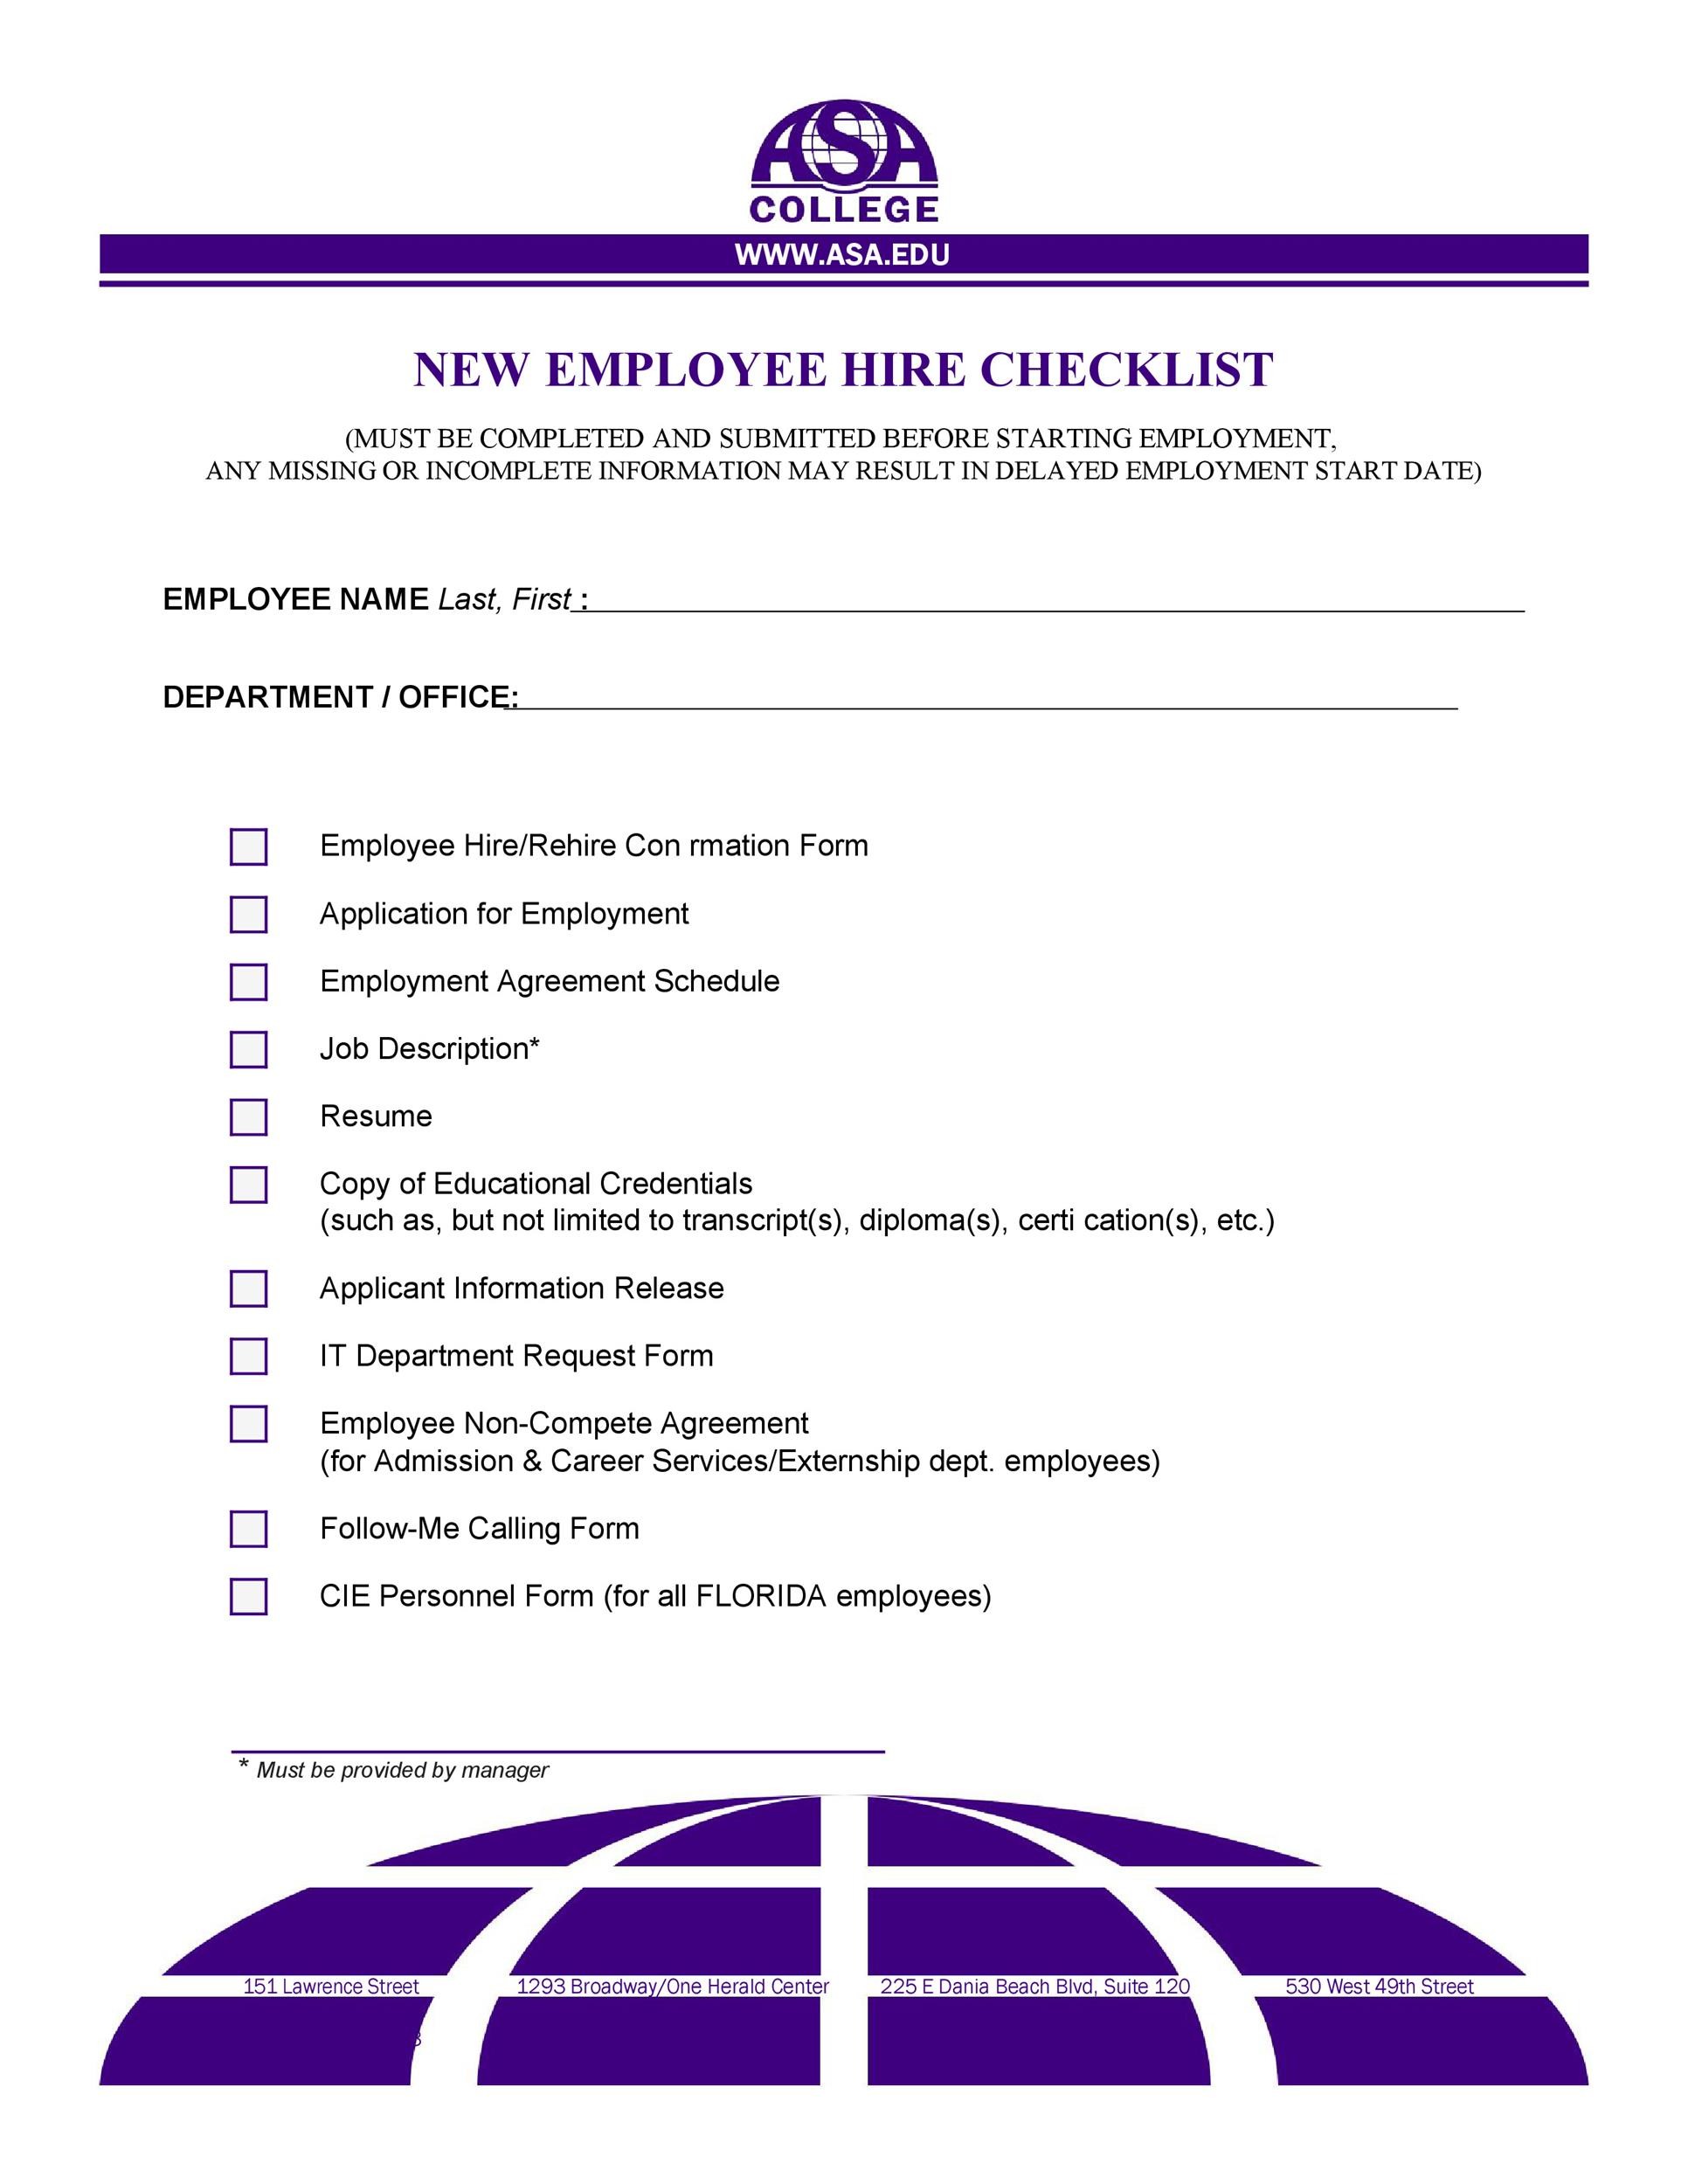 50-useful-new-hire-checklist-templates-forms-templatelab